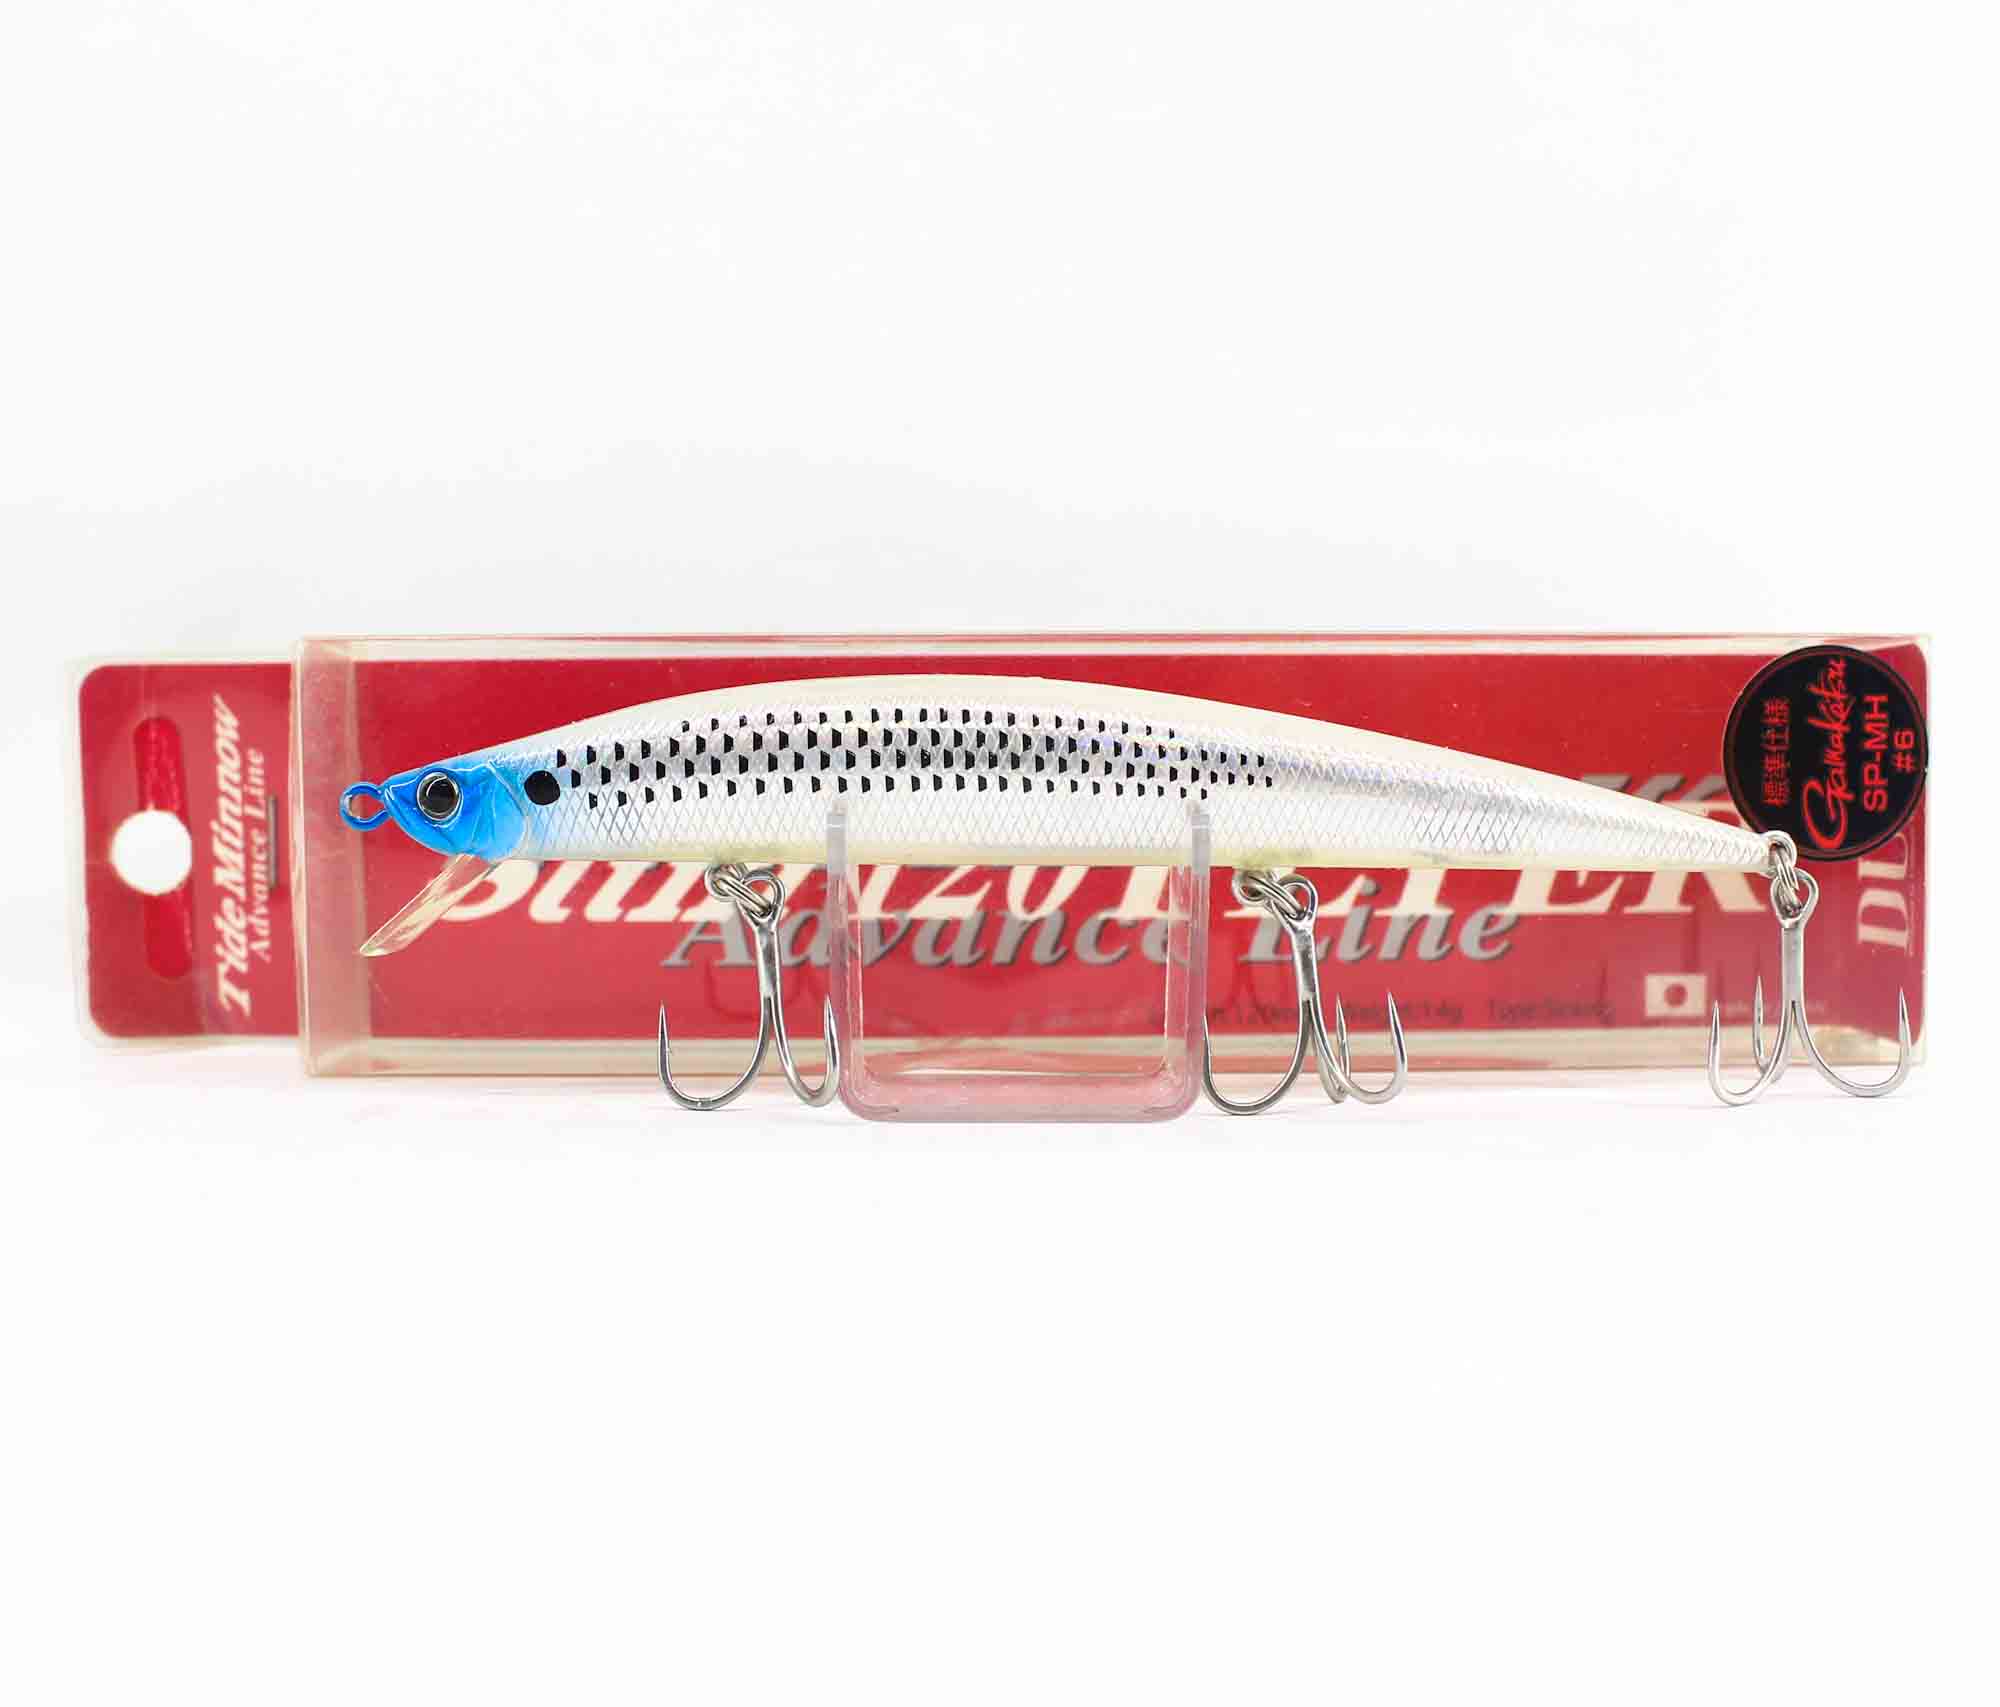 Duo Tide Minnow Flyer Slim 175 Sinking Lure ACCZ200 0915 